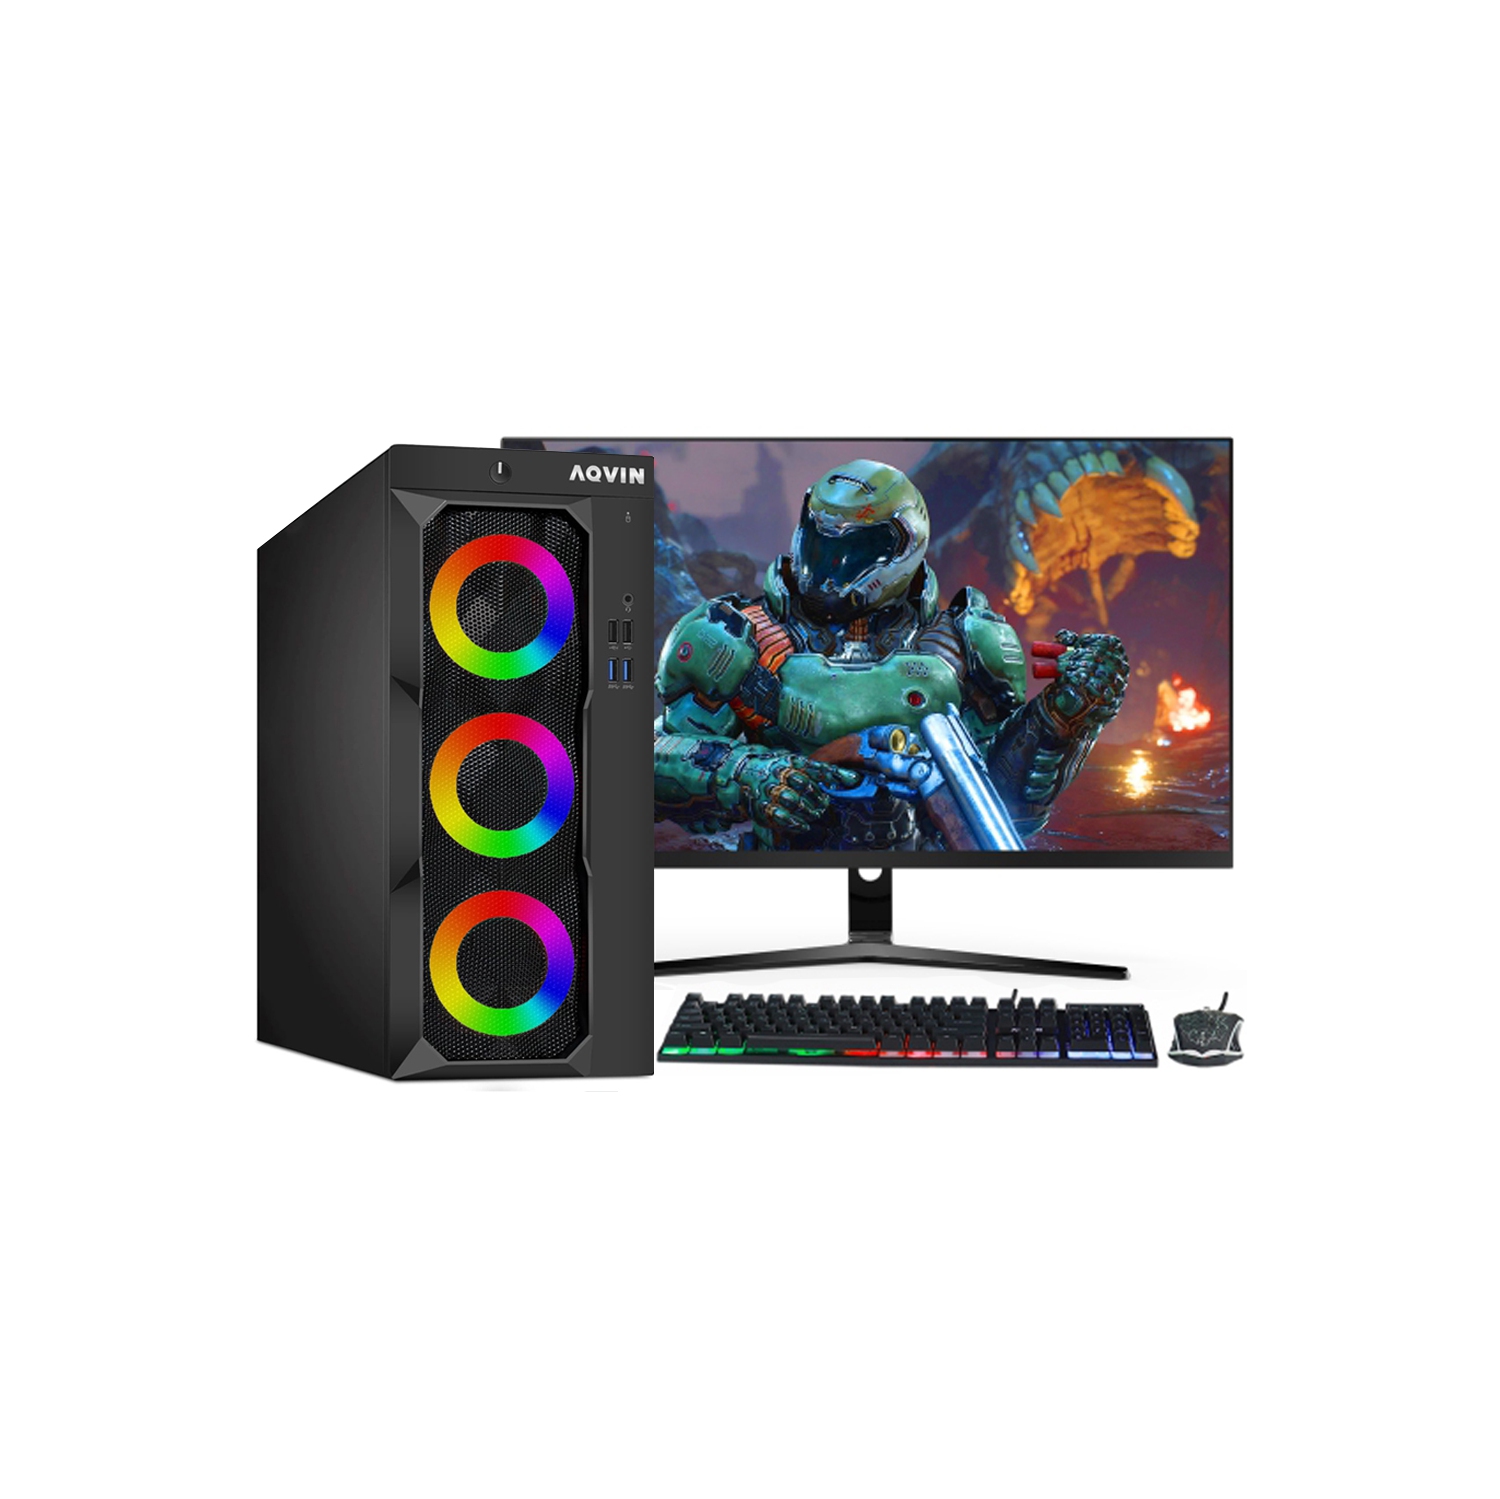 Refurbished (Excellent) - AQVIN LuminaRings Gaming PC Combo Desktop Computer New 27 inch Curved Monitor Intel Core i7 Processor 32GB RAM 1TB SSD AMD RX 550 DDR5 HDMI Windows 10 Pro